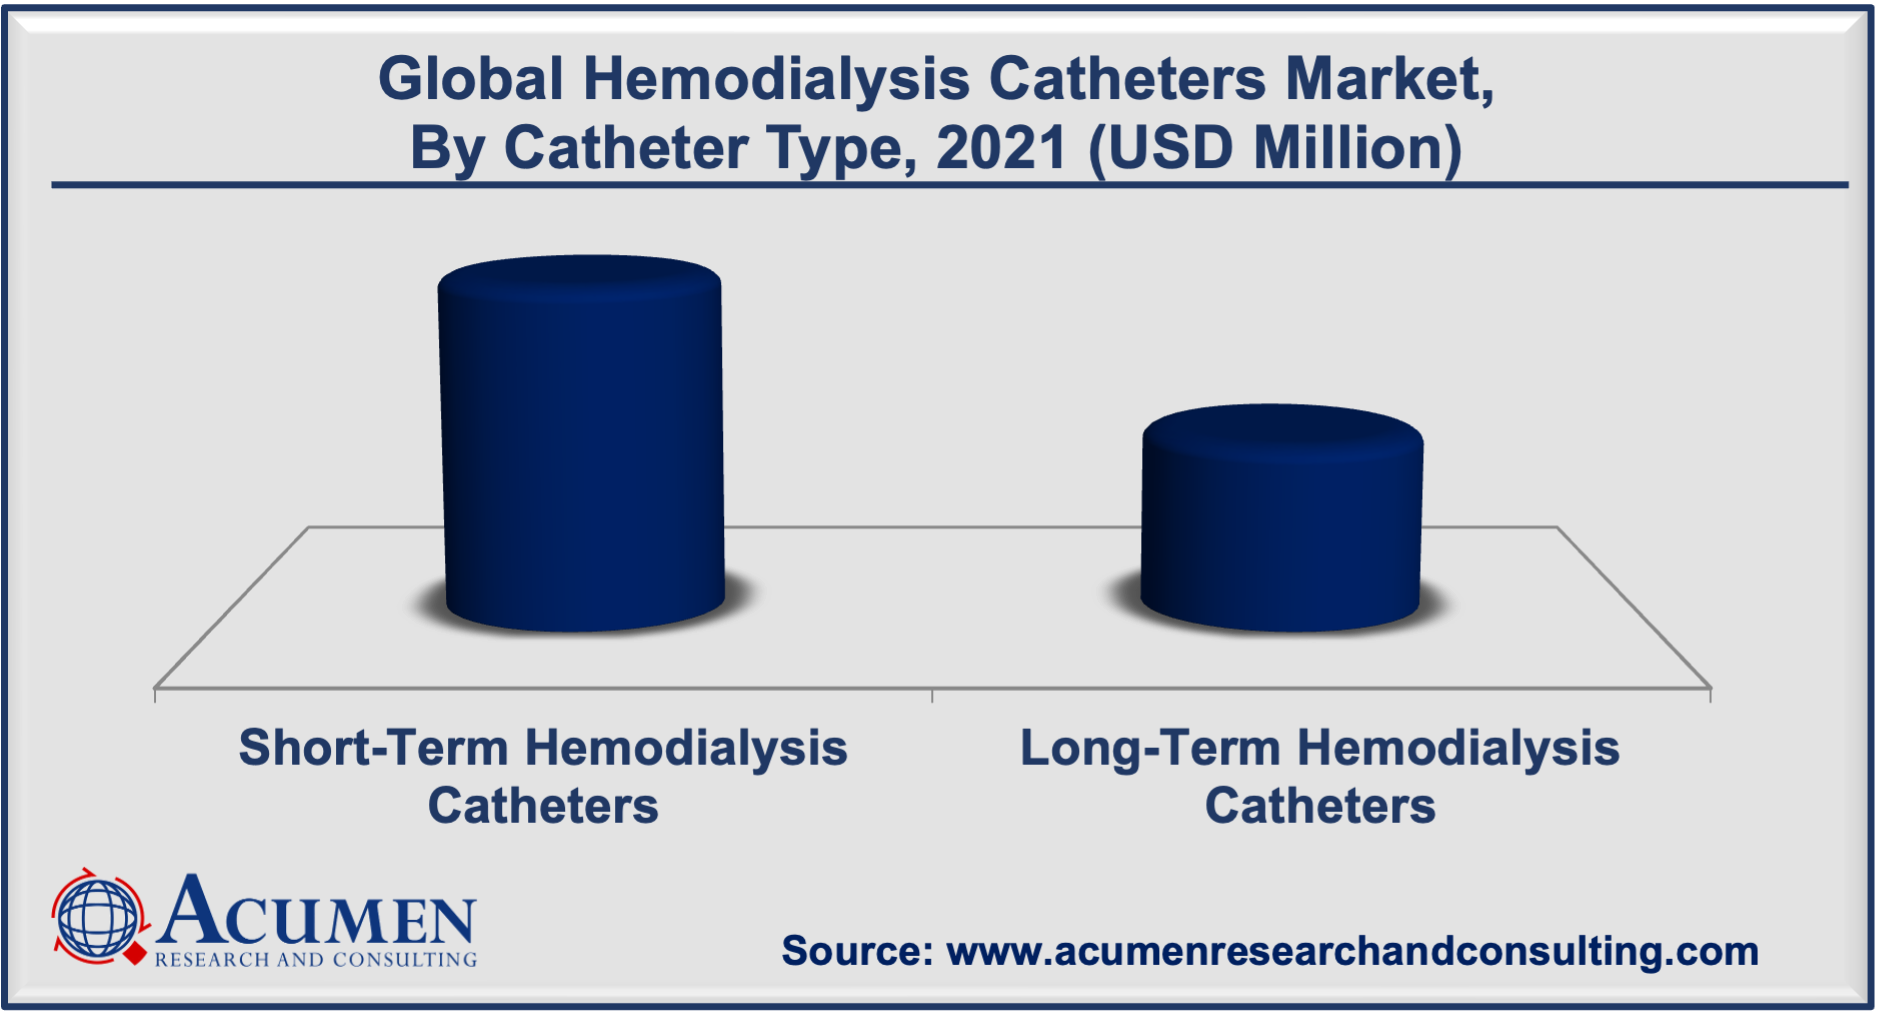 Hemodialysis Catheters Market Share accounted for USD 787 Million in 2021 and is estimated to reach the market value of USD 1,214 Million by 2030.